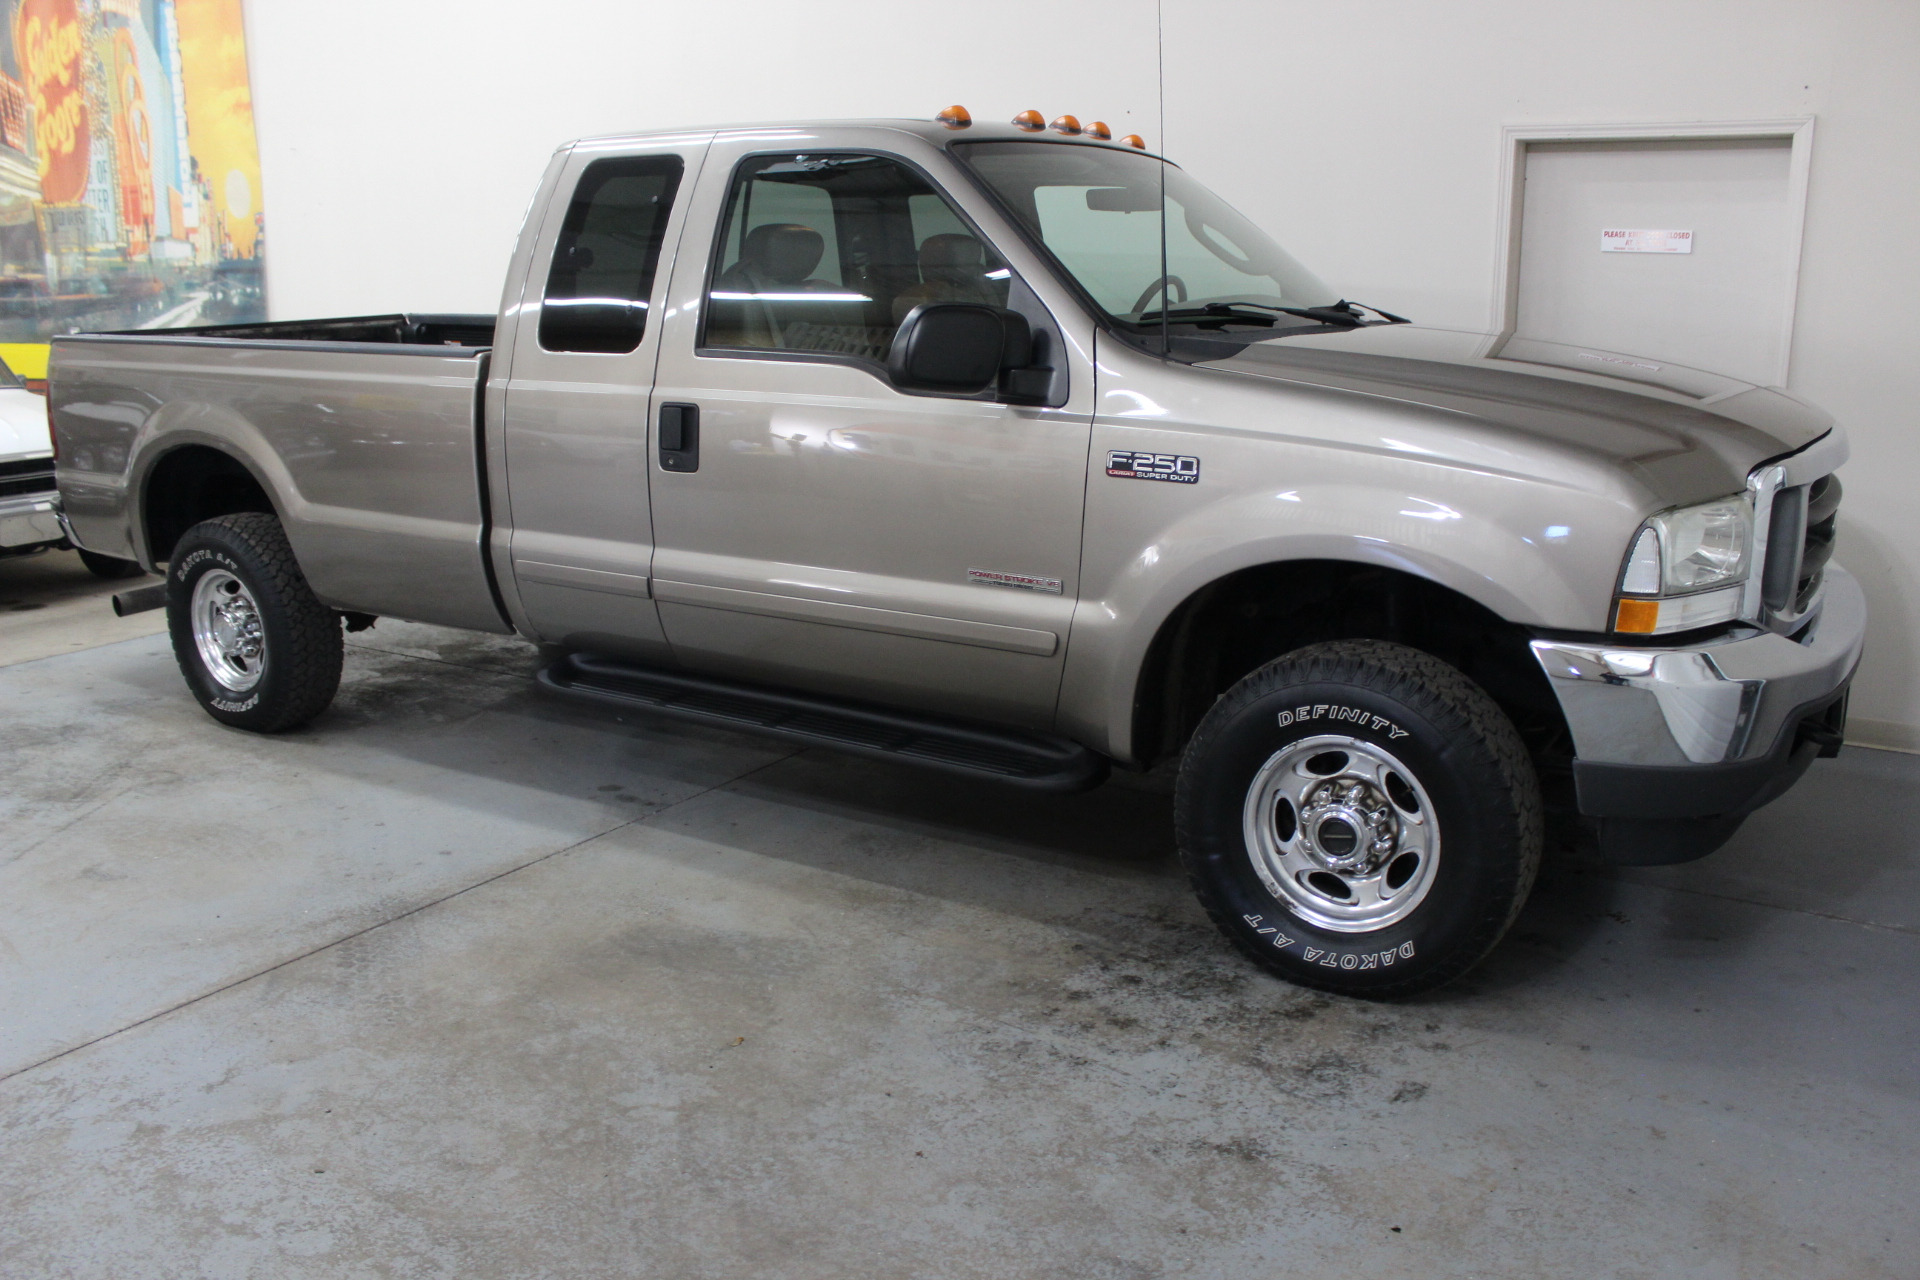 2003 Ford F-250 Super Duty Lariat - Biscayne Auto Sales | Pre-owned Dealership | Ontario, NY 2003 Ford F250 Super Duty Tire Size